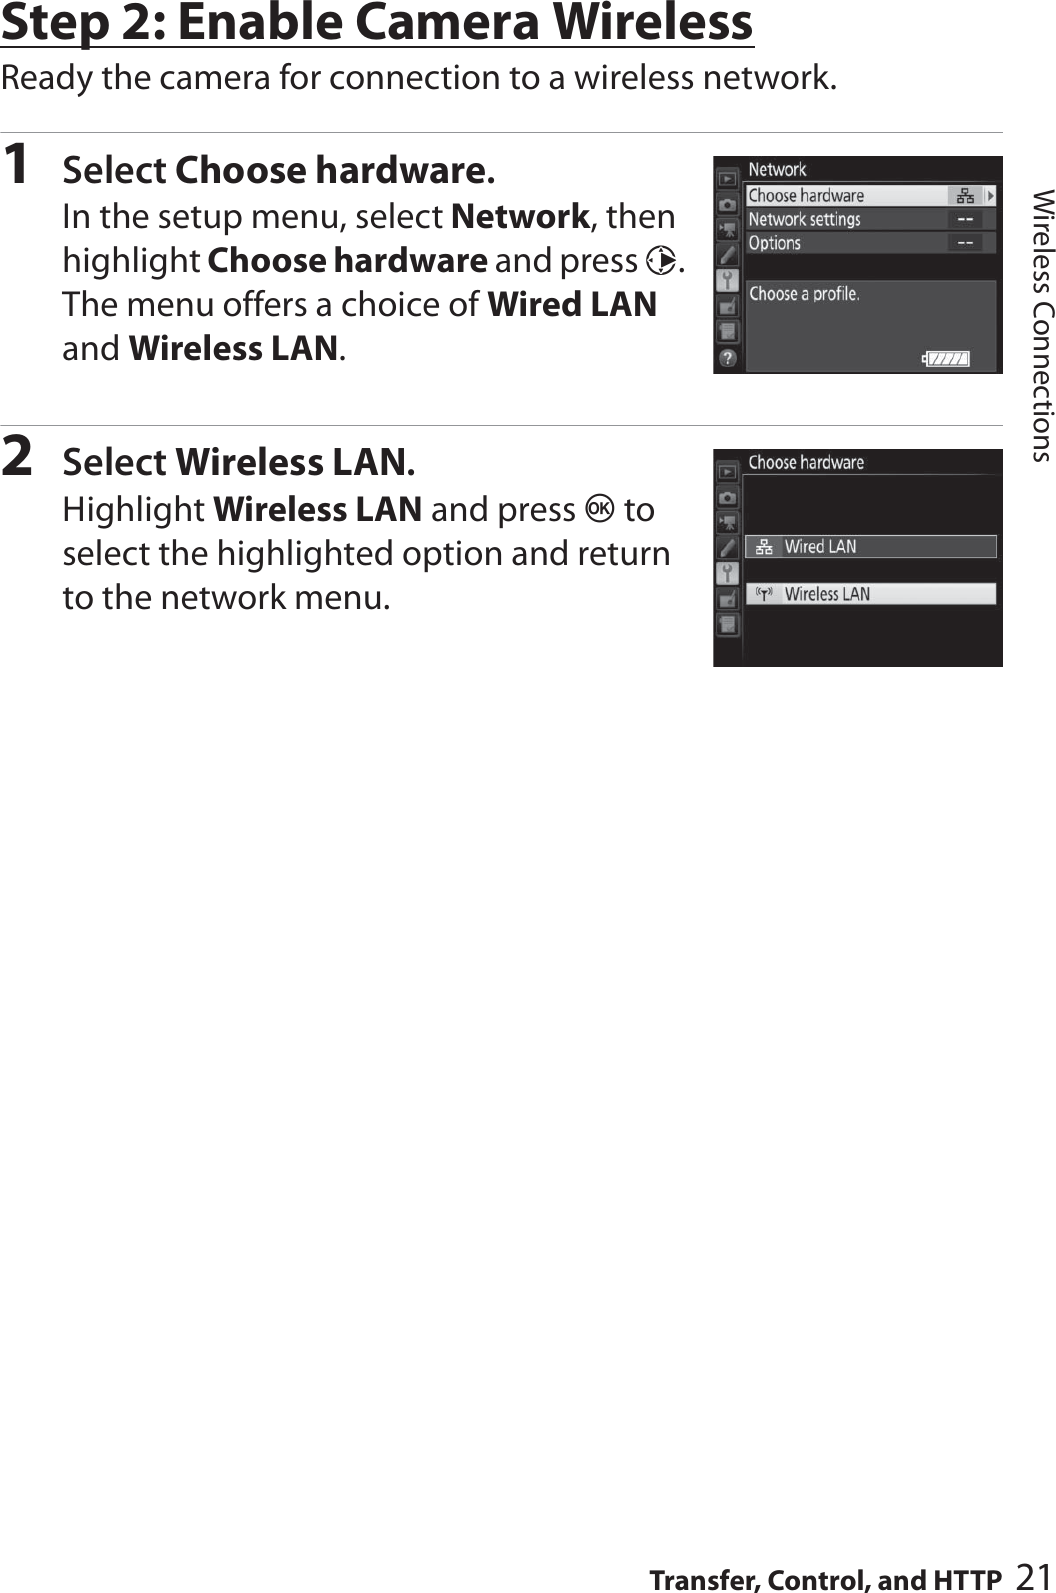 21Transfer, Control, and HTTPWireless ConnectionsStep 2: Enable Camera WirelessReady the camera for connection to a wireless network.1Select Choose hardware.In the setup menu, select Network, then highlight Choose hardware and press 2. The menu offers a choice of Wired LAN and Wireless LAN.2Select Wireless LAN.Highlight Wireless LAN and press J to select the highlighted option and return to the network menu.